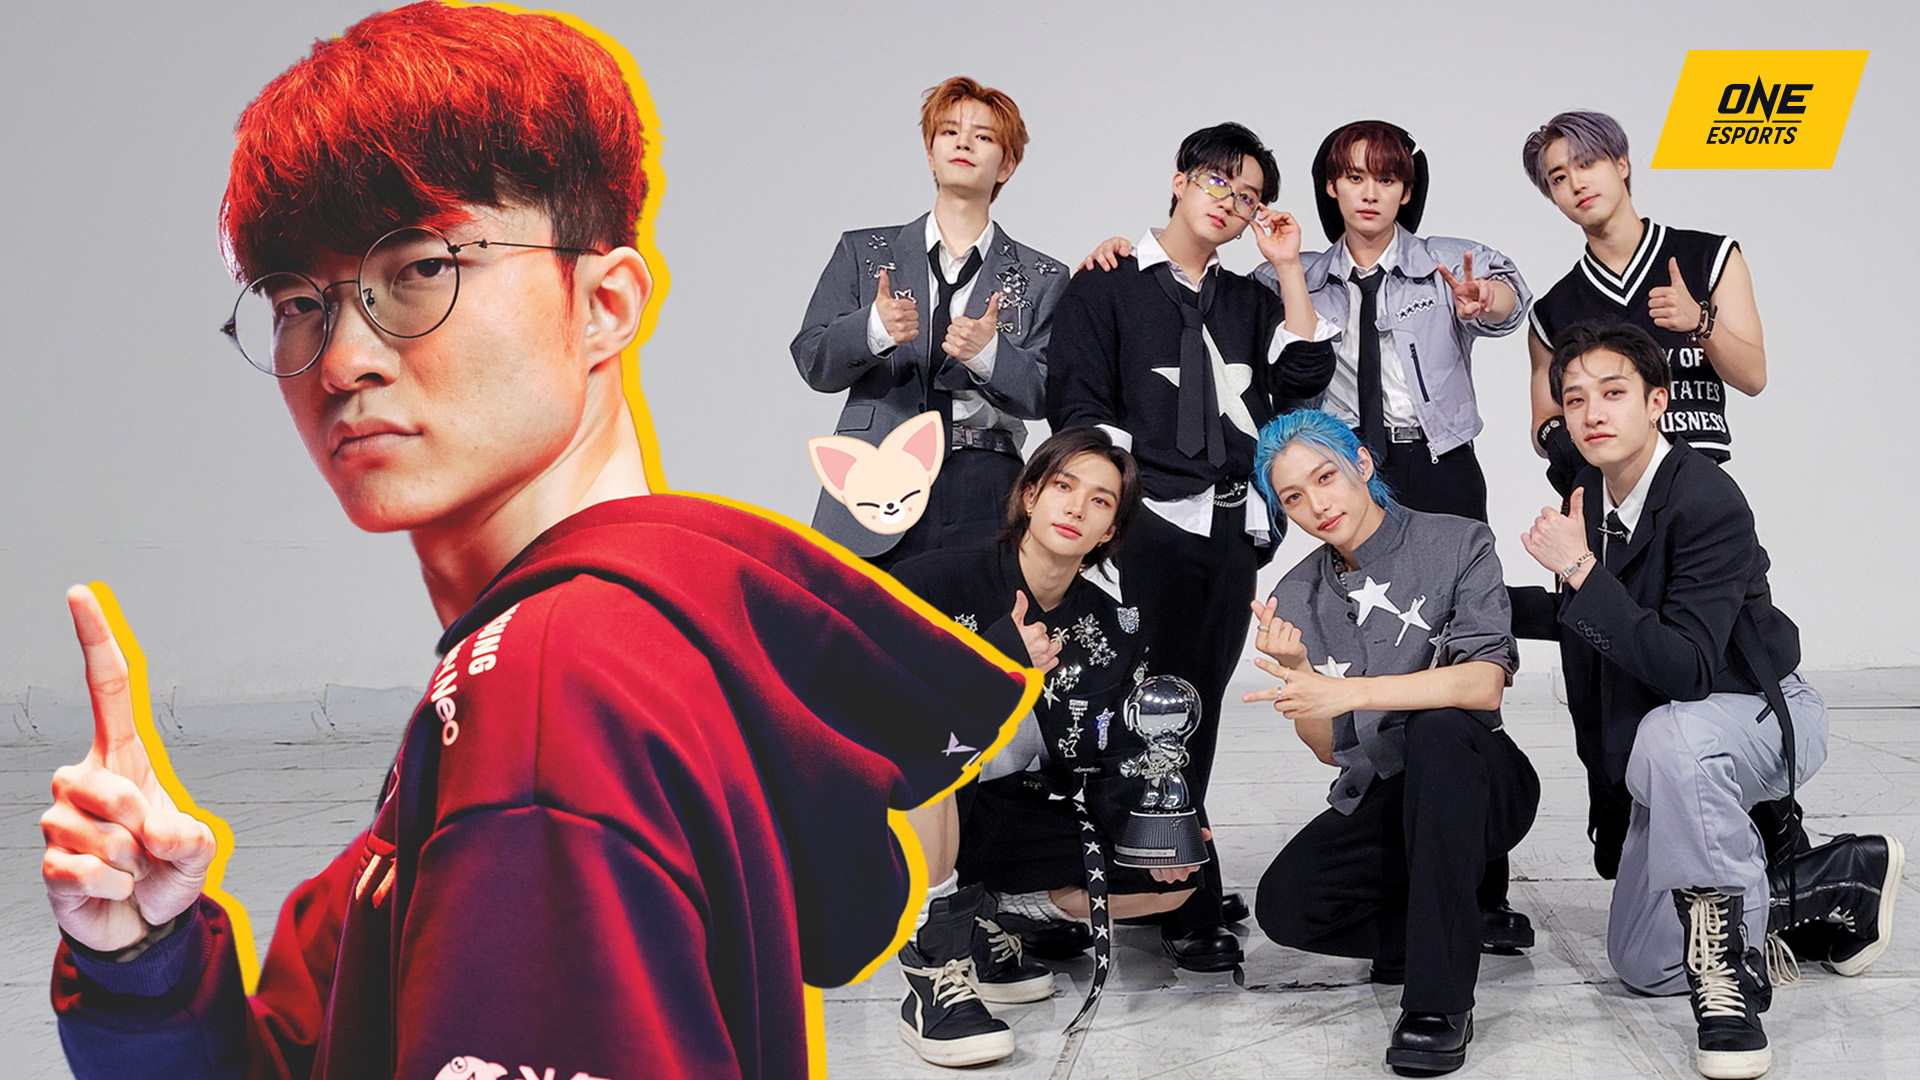 What do Faker and Shakespeare have in common? Find out in this Stray Kids k-pop song